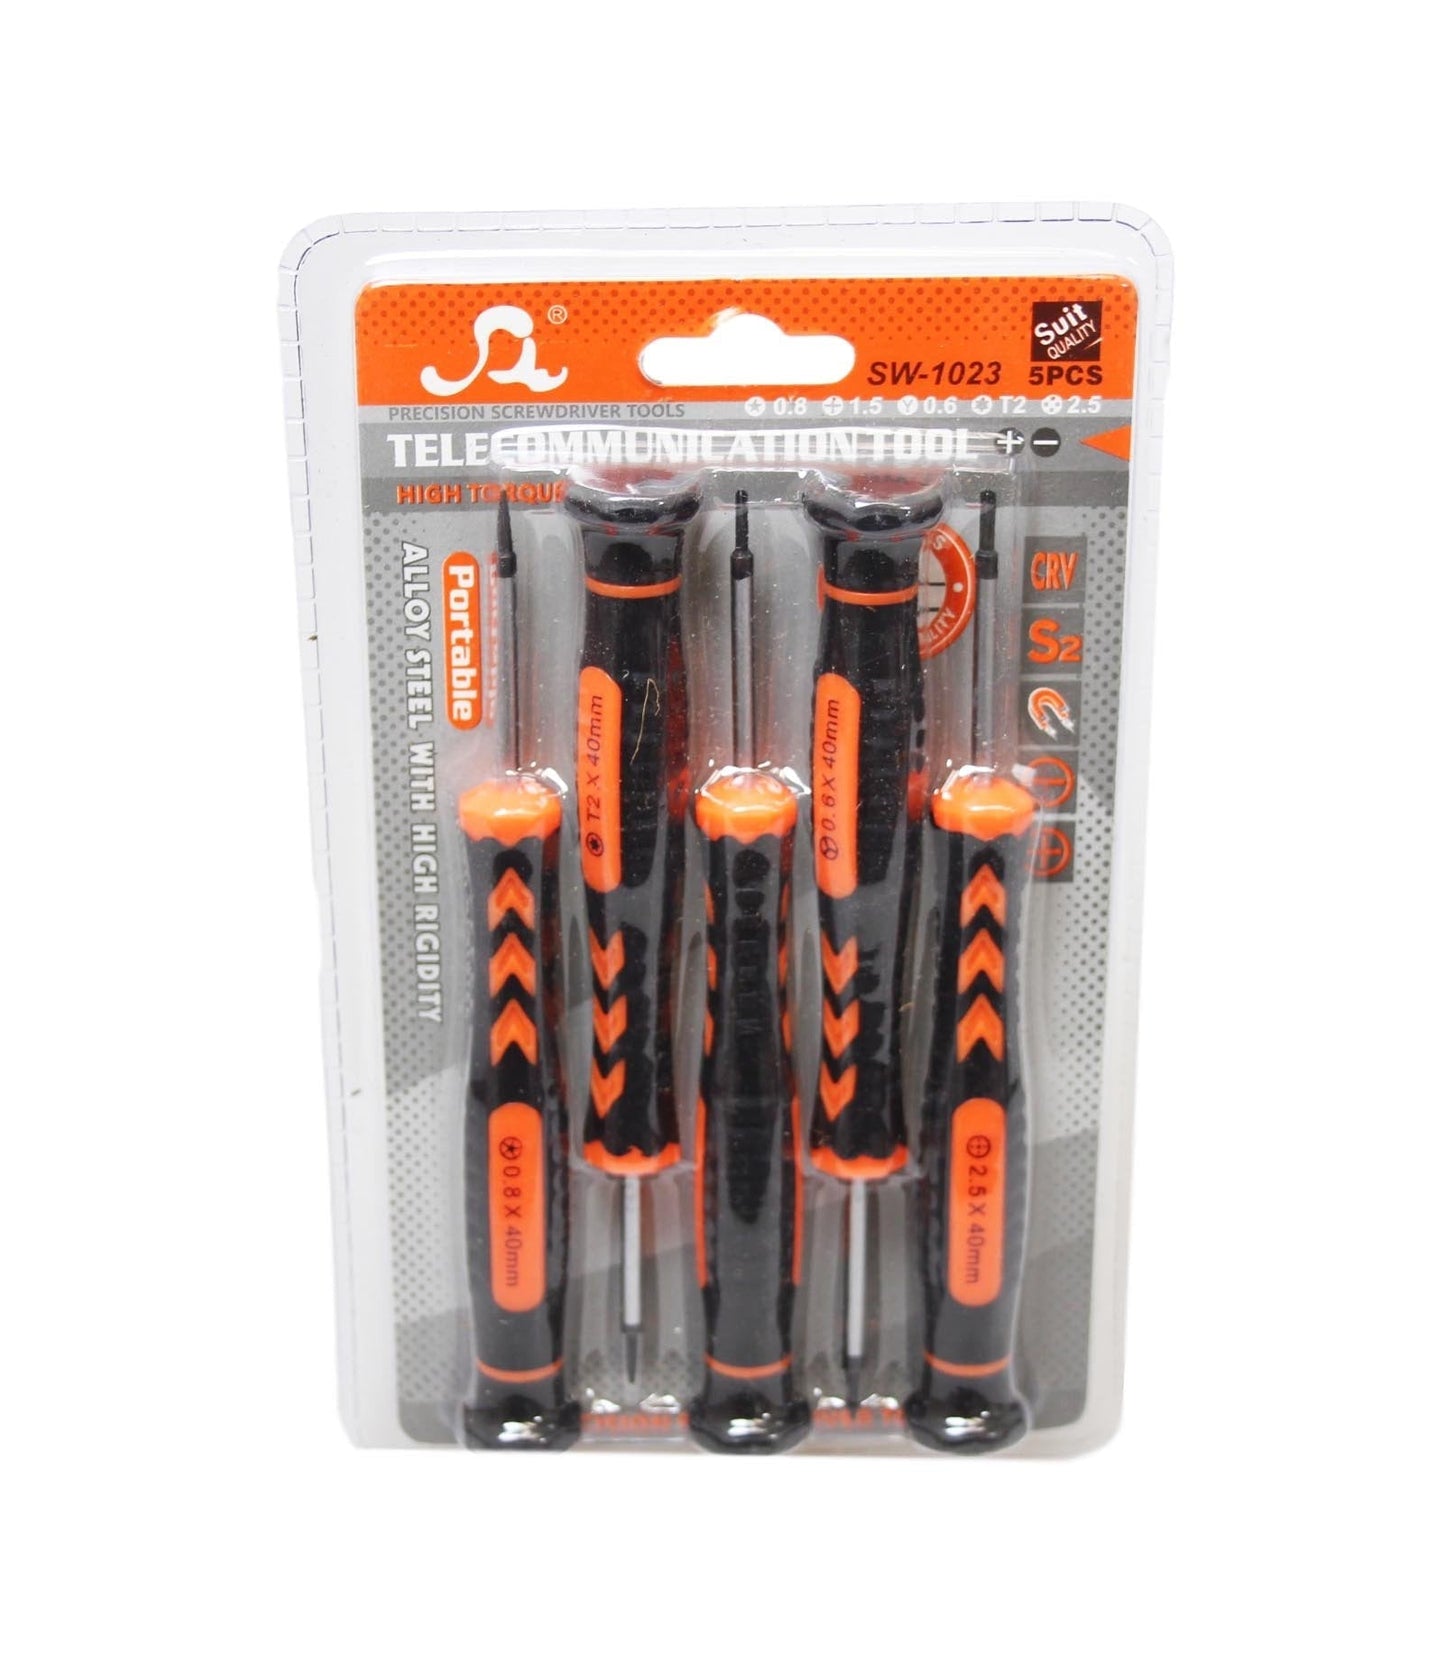 Mobile Phone Telecommunication Repair Screwdriver Set of 5 6205 A (Large Letter)